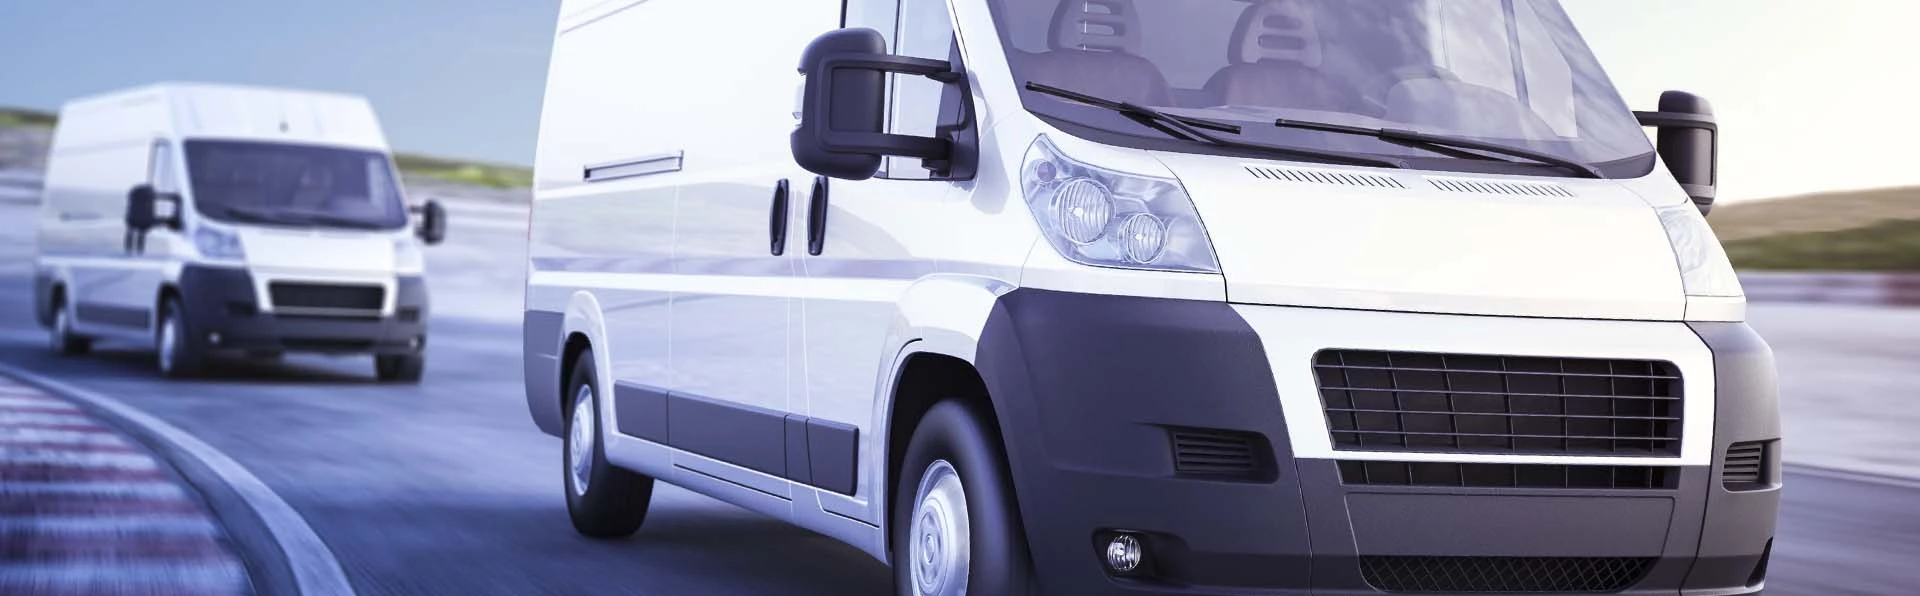 What Are the Most Reliable Van Makes for my Business?